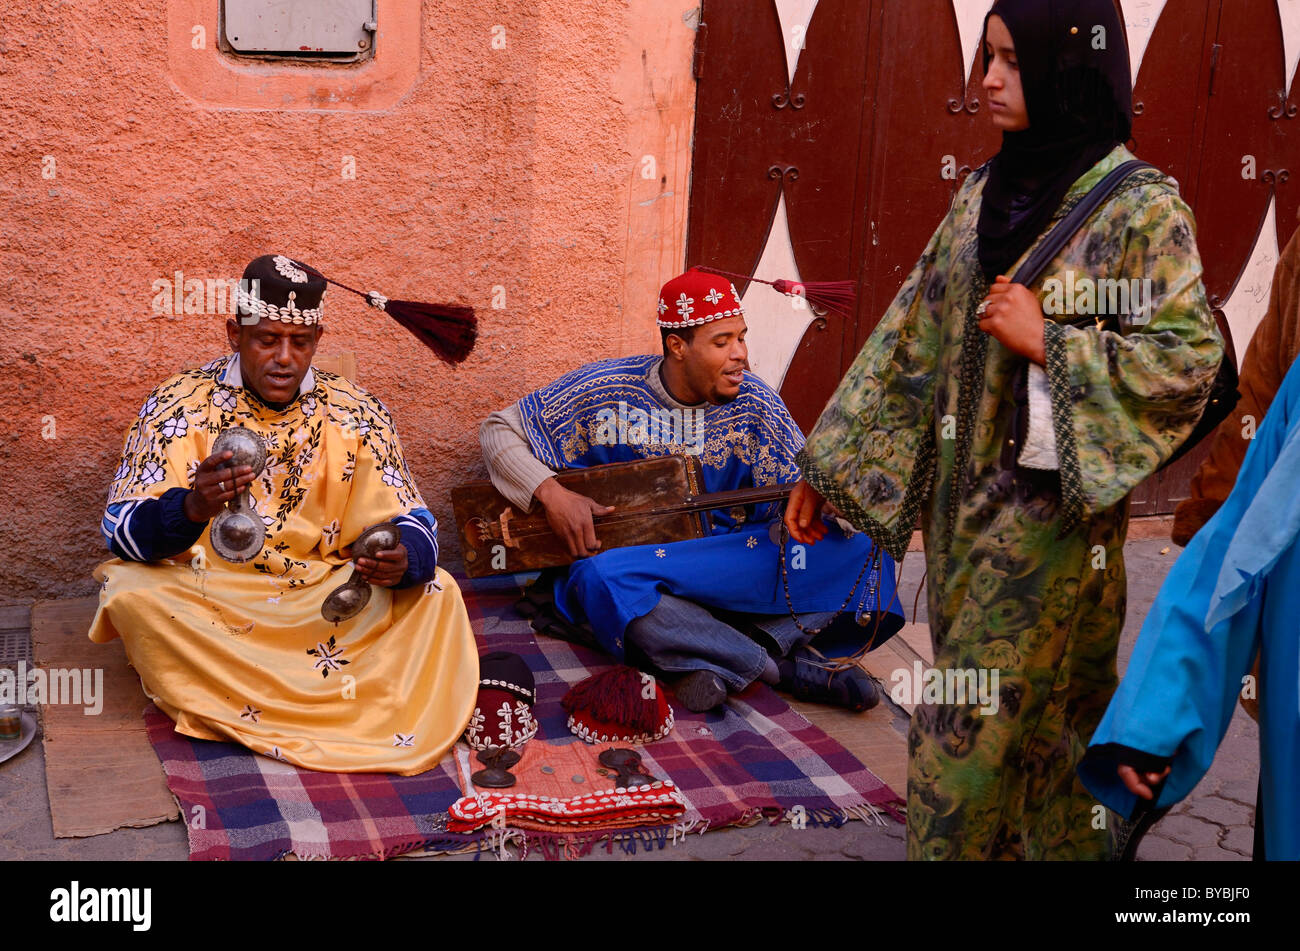 Happy Gnawa street musicians in Marrakesh swinging their tarboosh tassels in time with the music and women passersby Morocco Stock Photo